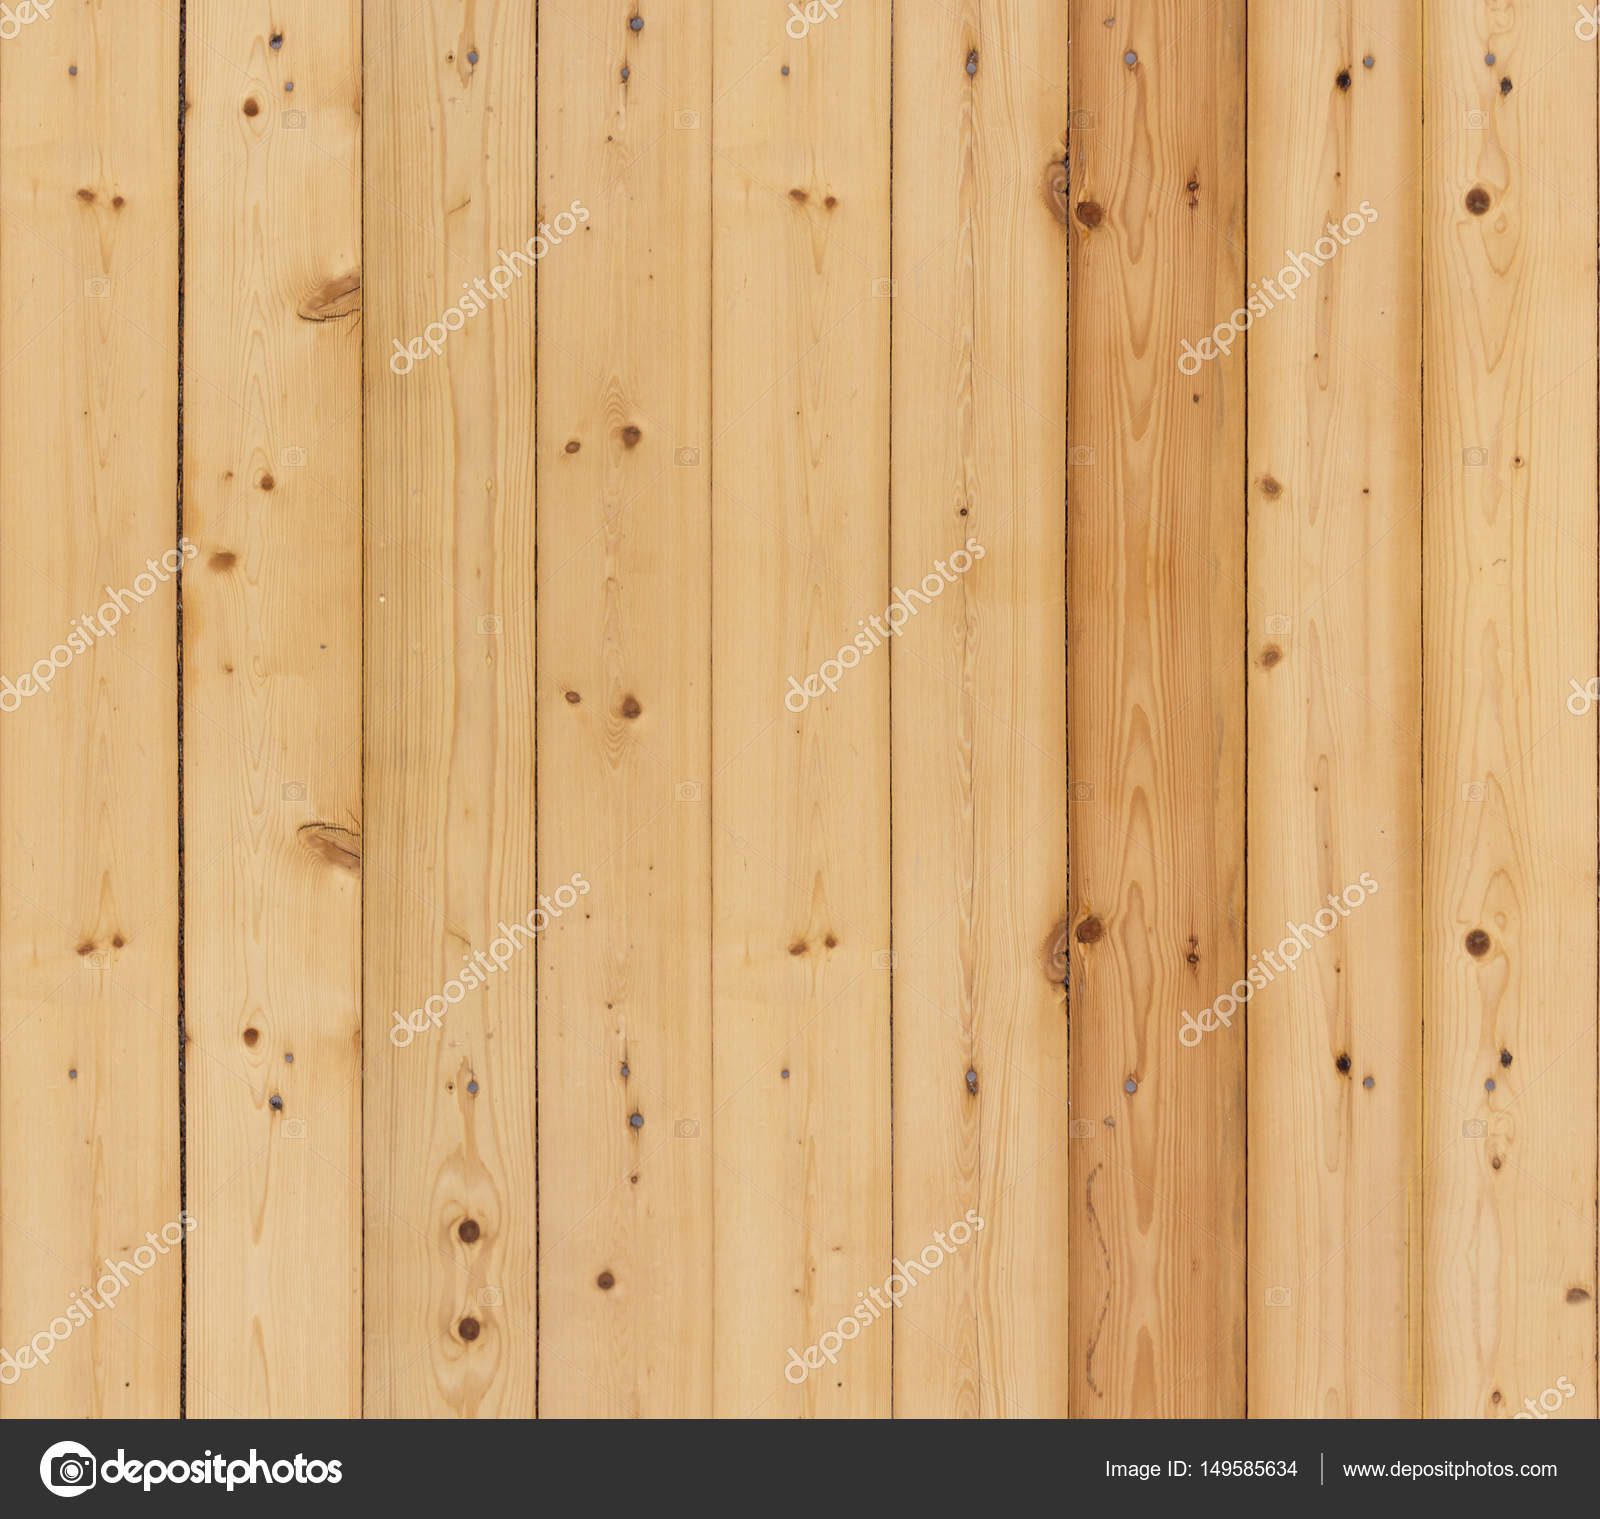 Old wood texture. Floor surface / seamless close-up texture / rustic ...